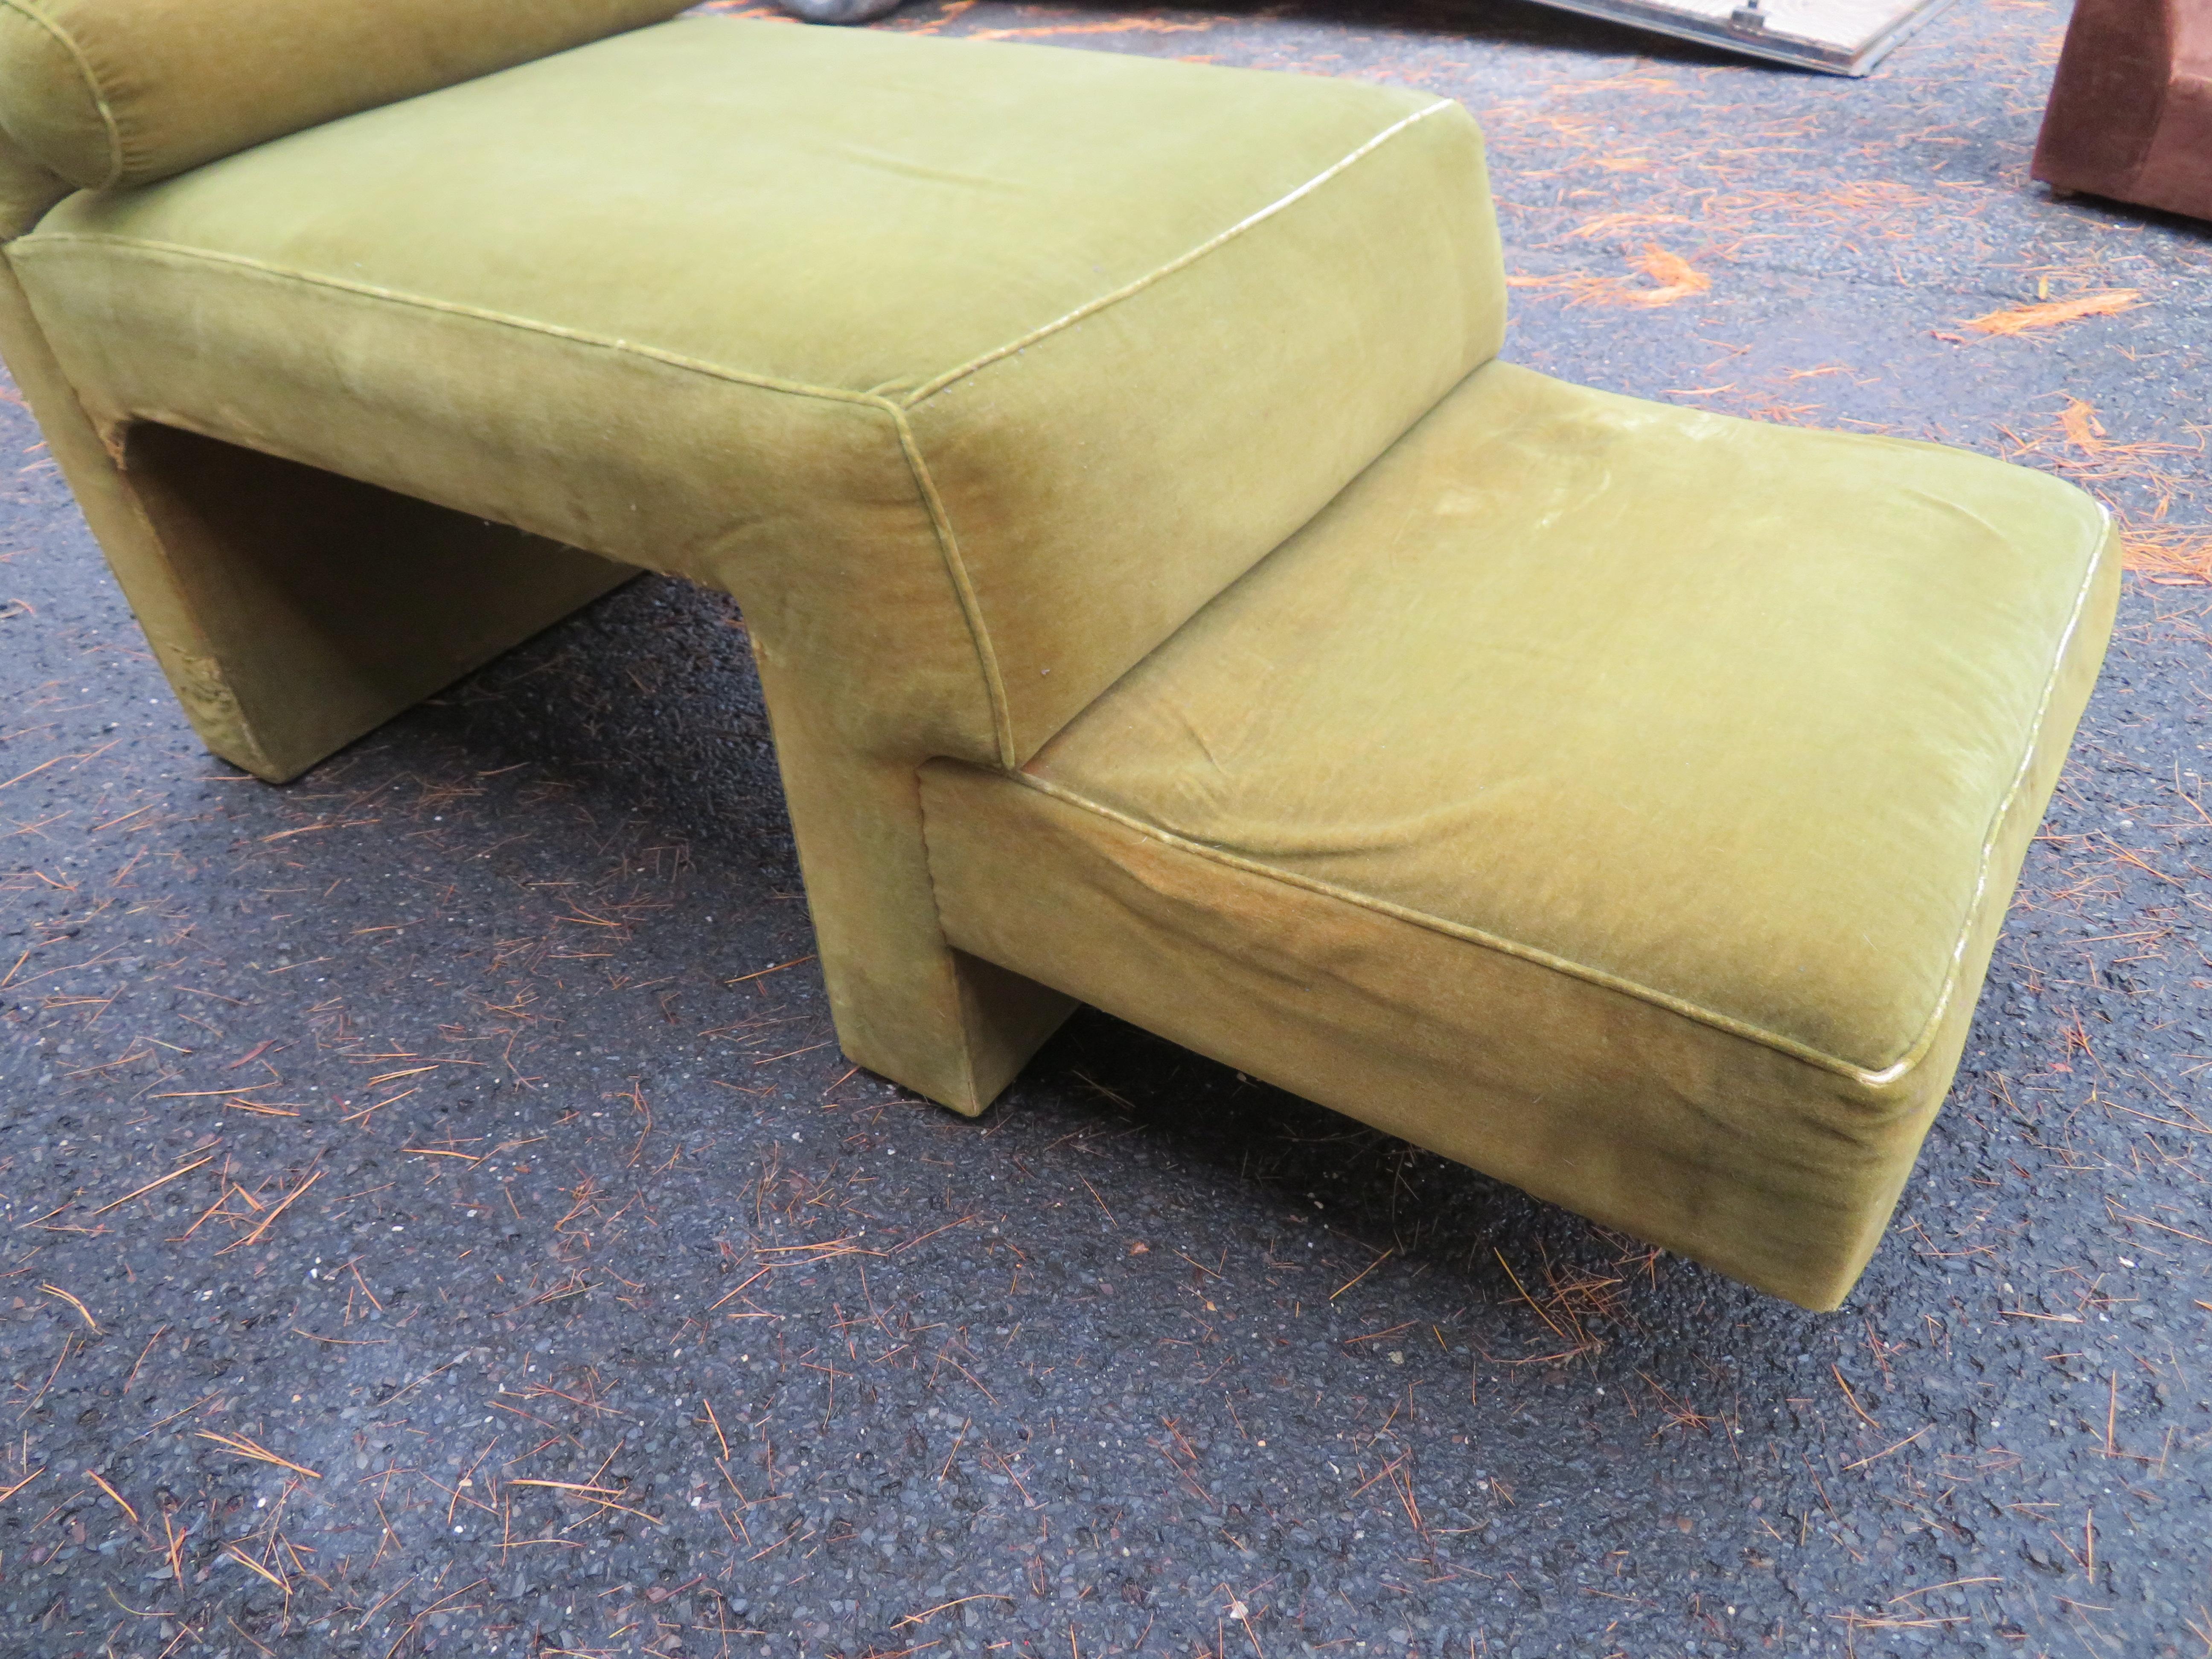 Upholstery Rare 2 Tier Vladimir Kagan Omnibus Chaise Lounge Sofa Lucite Mid-Century Modern For Sale